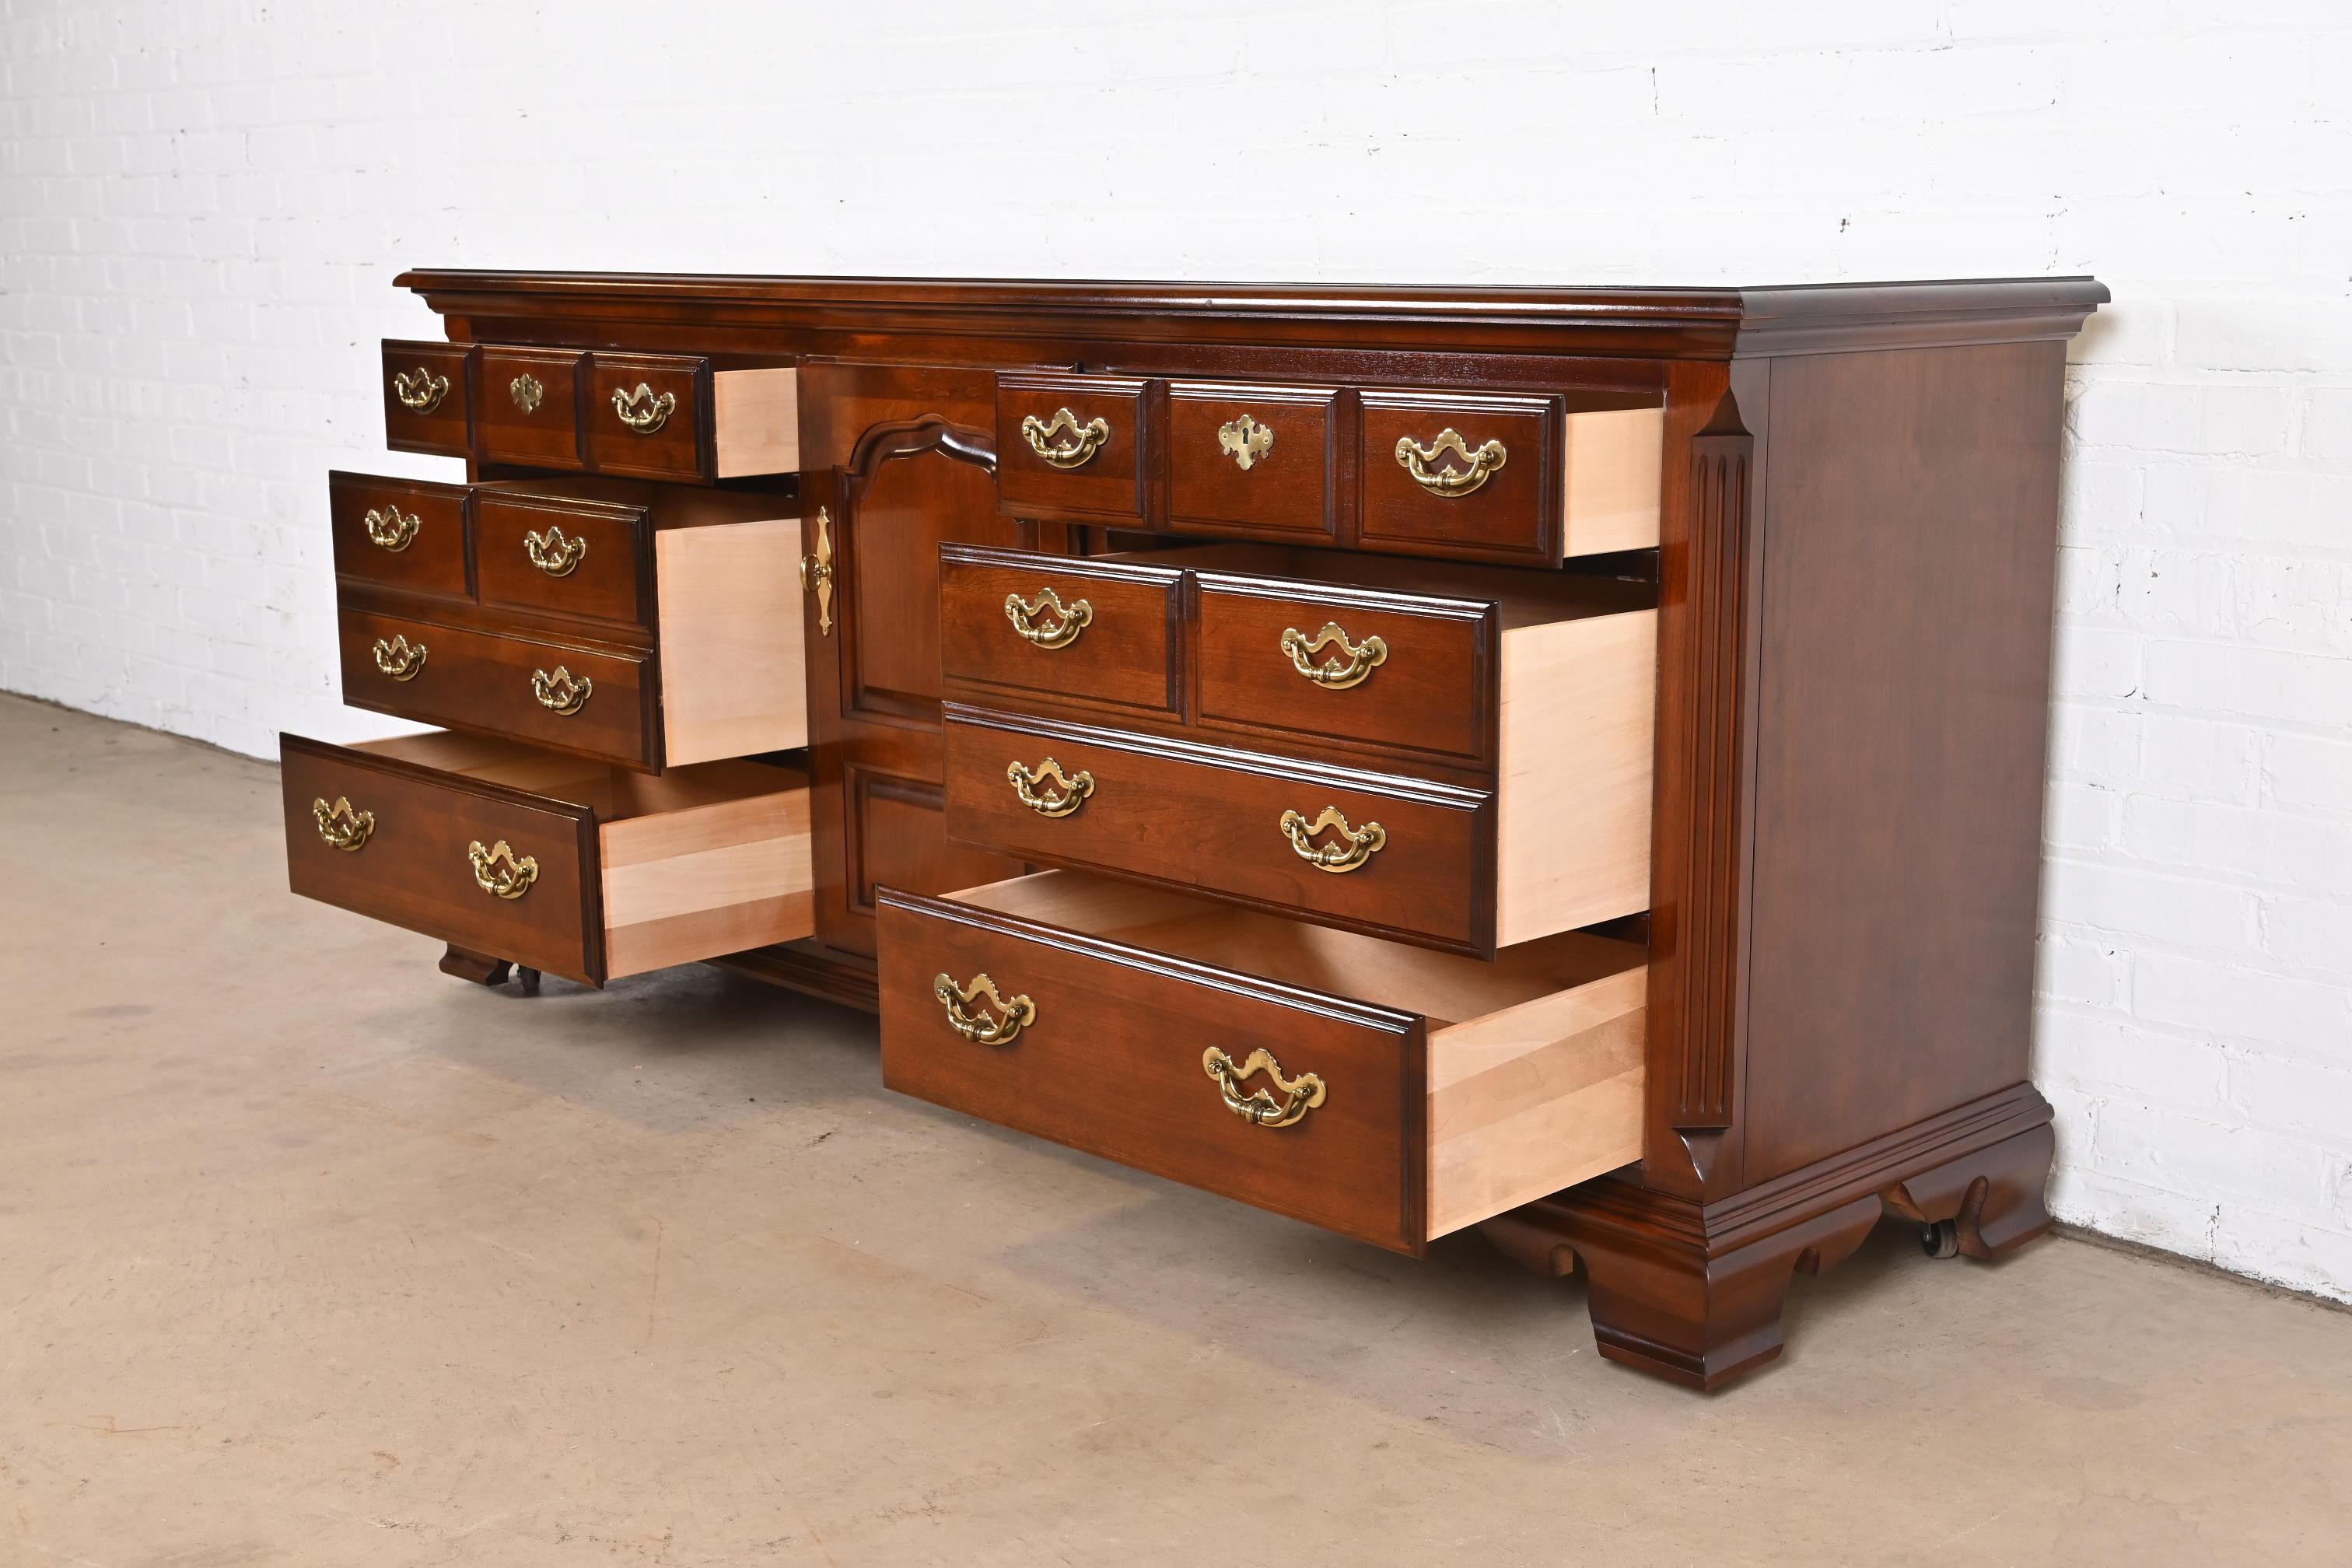 Thomasville Georgian Solid Cherry Wood Dresser or Credenza For Sale 1